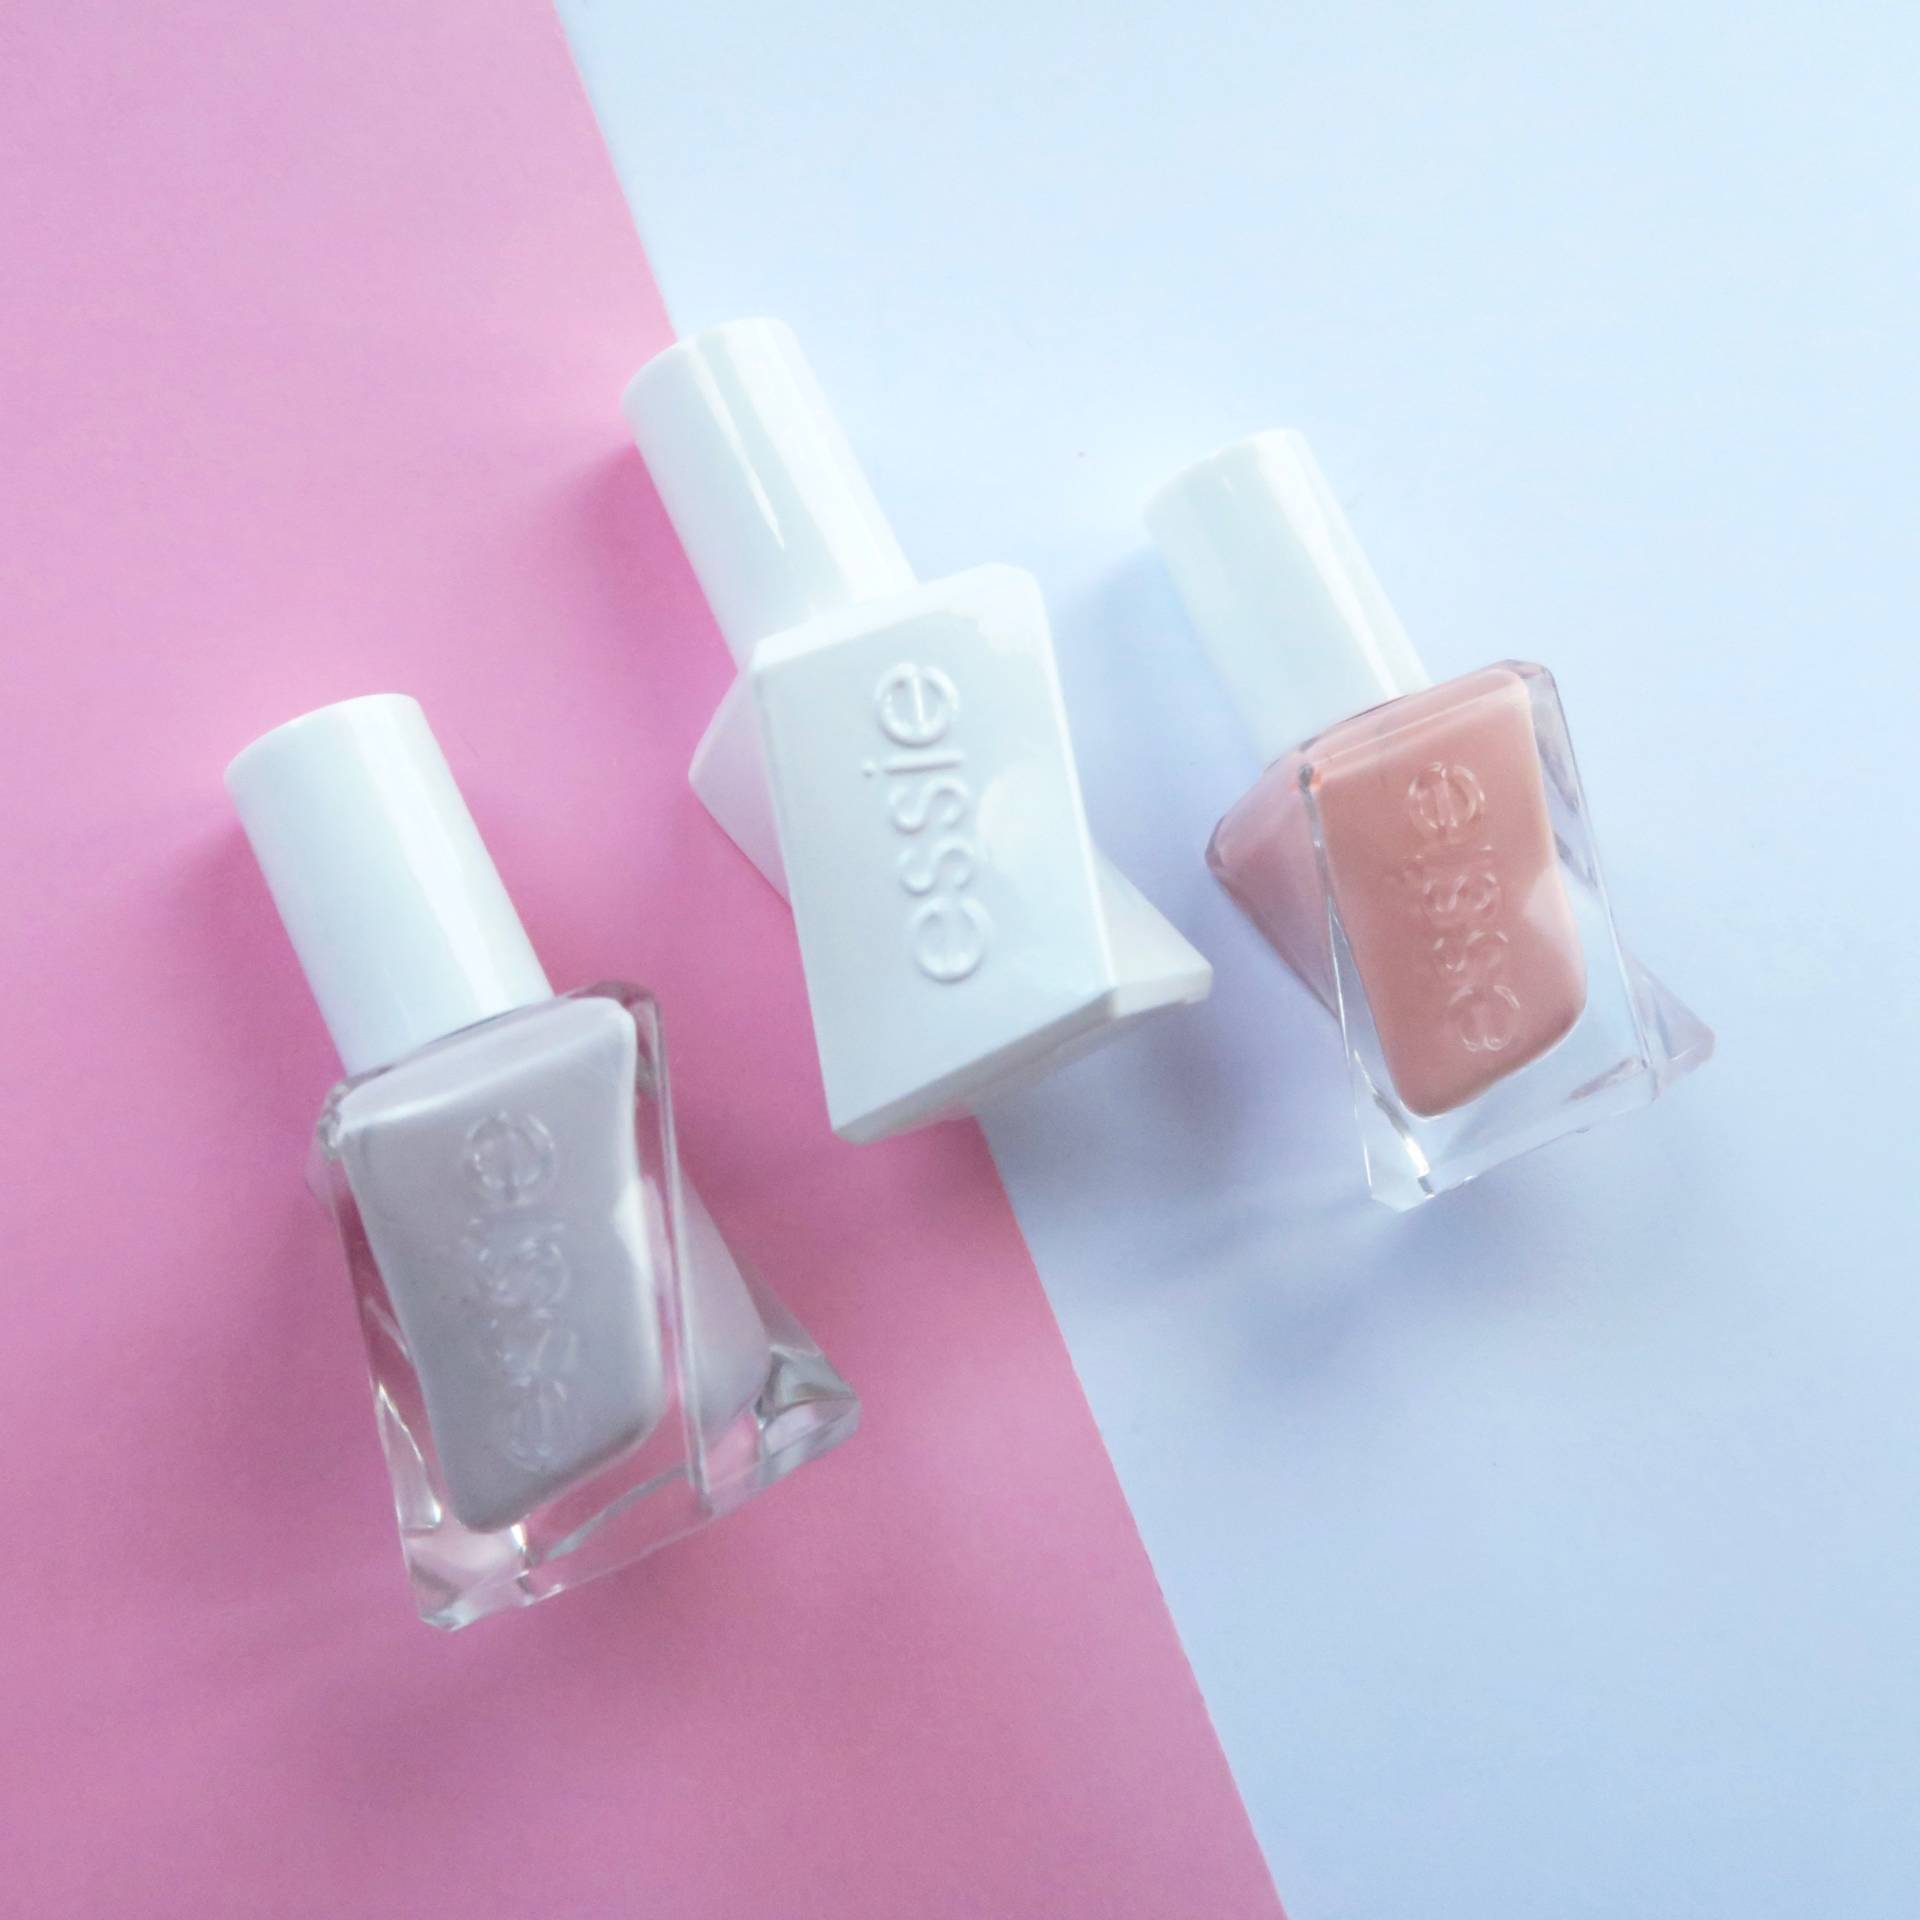 Essie Gel Couture Review